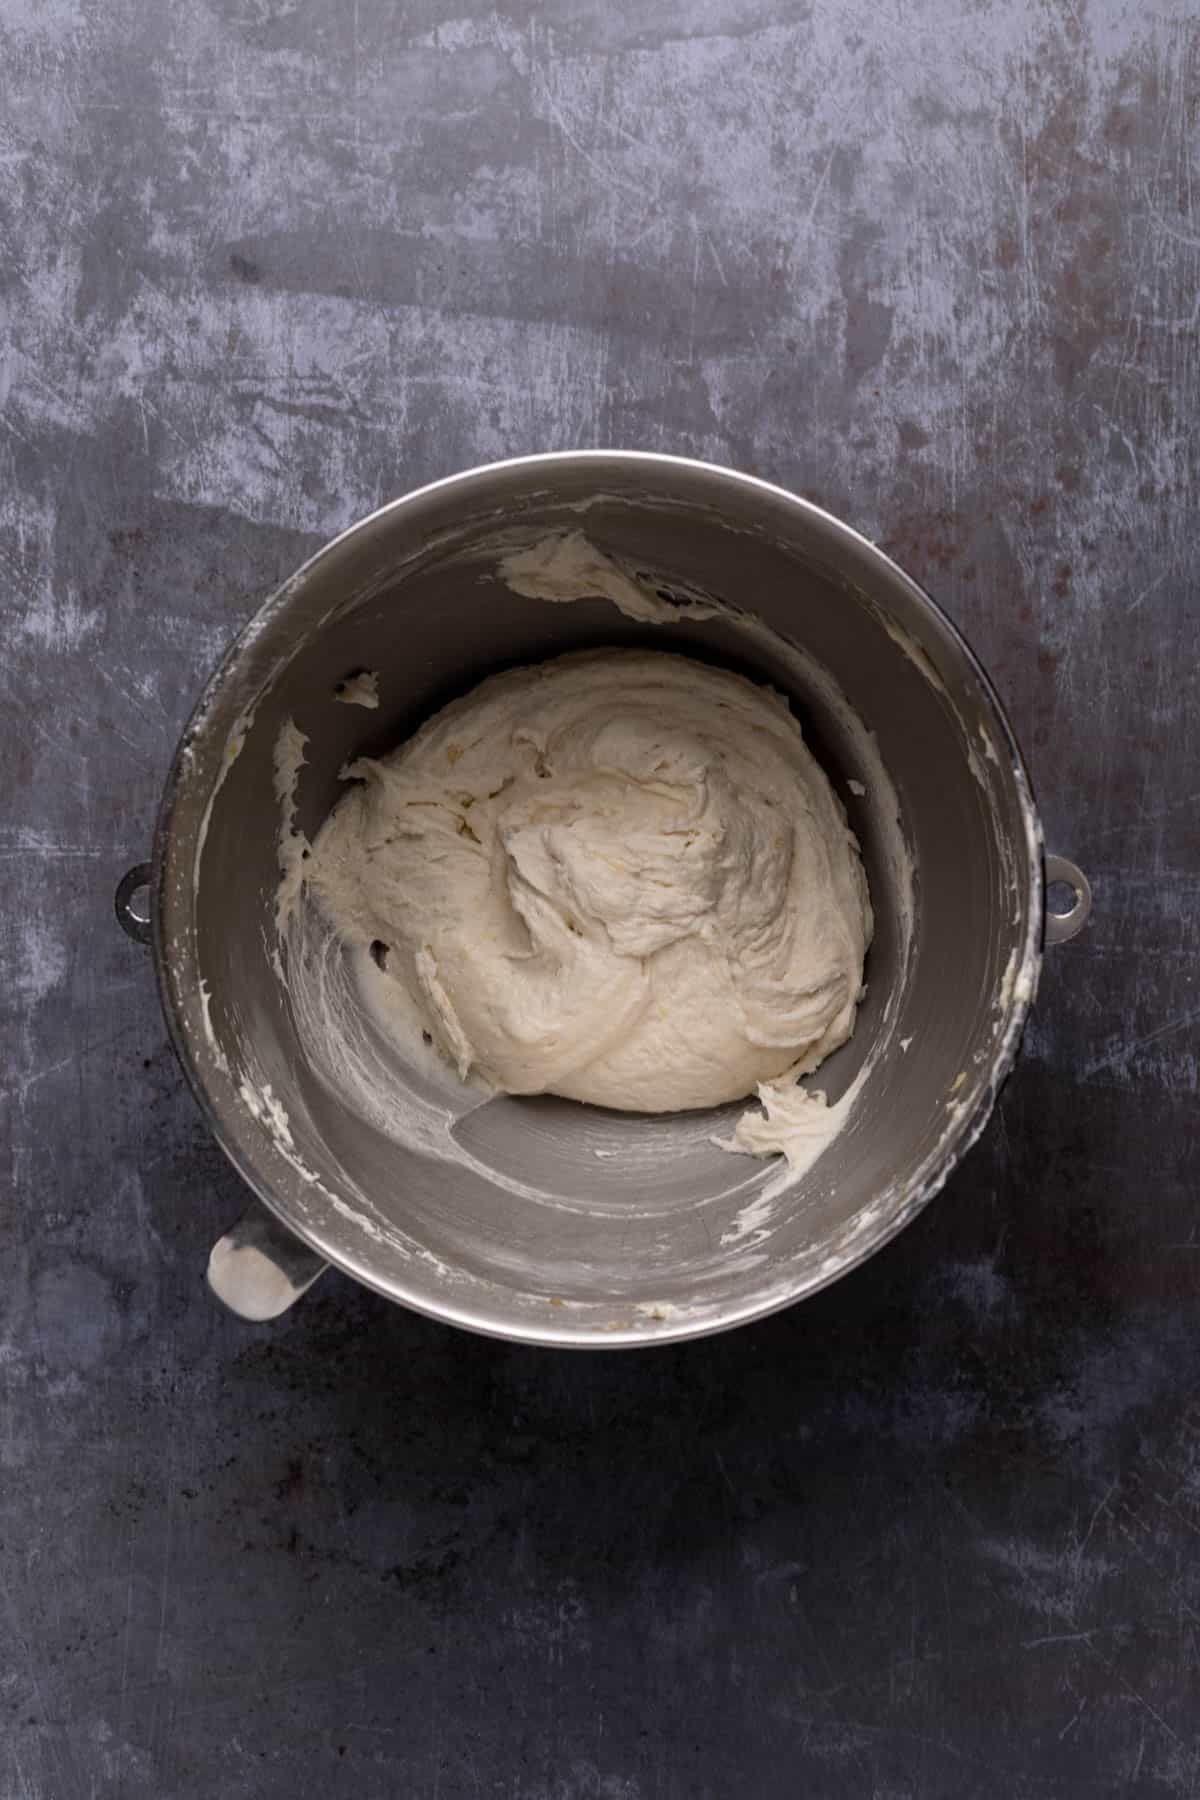 Banana buttercream frosting mixed in a stand mixer mixing bowl set on a flat surface.